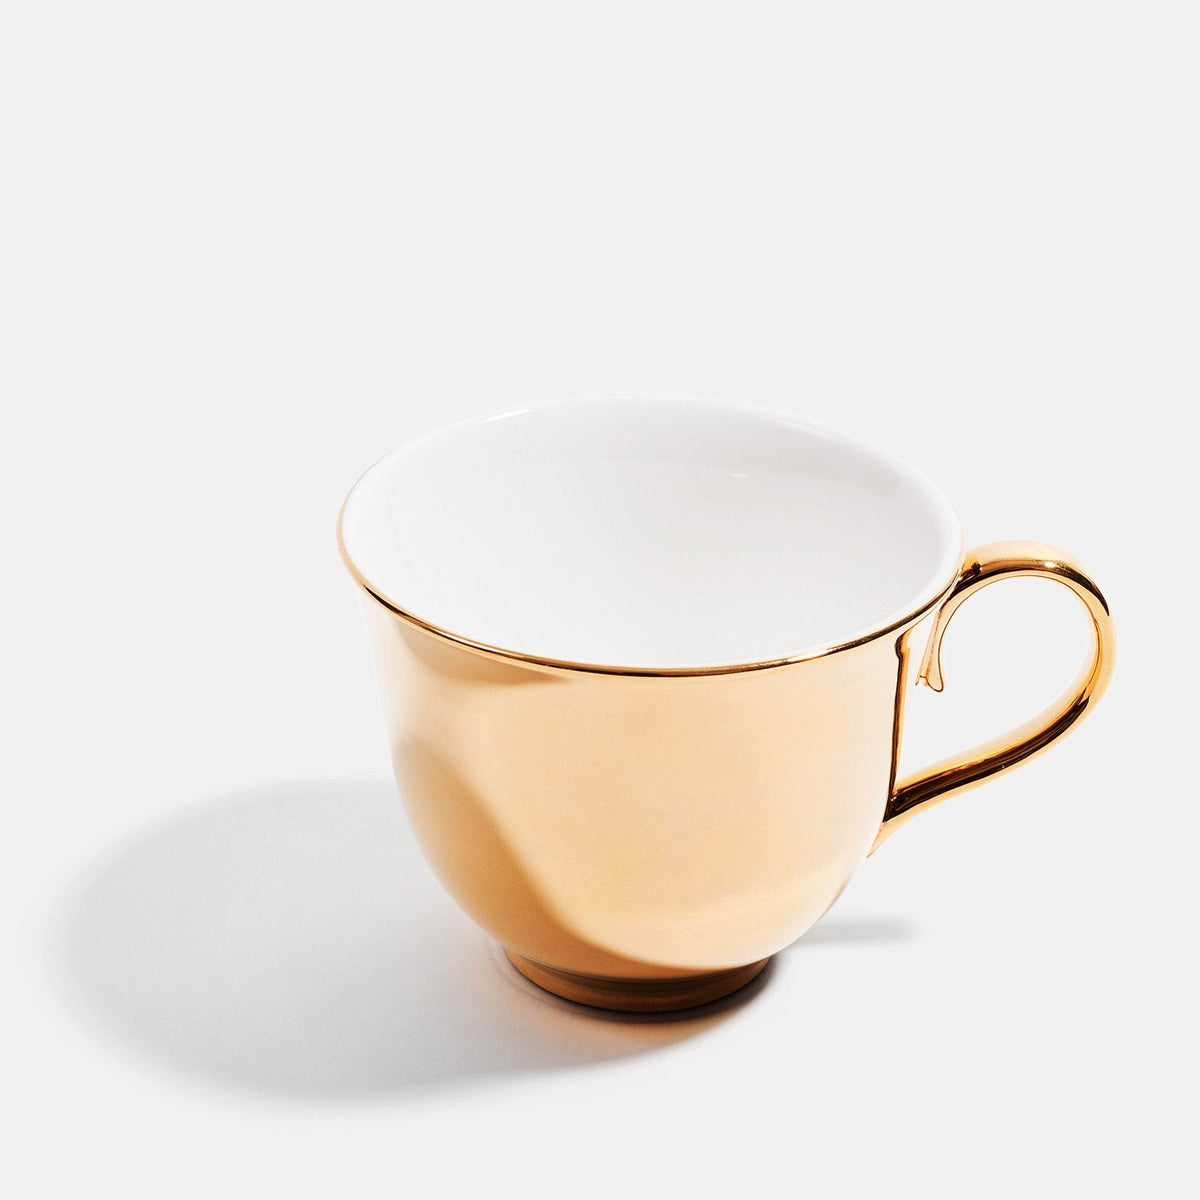 Gold Teacup- Reflect